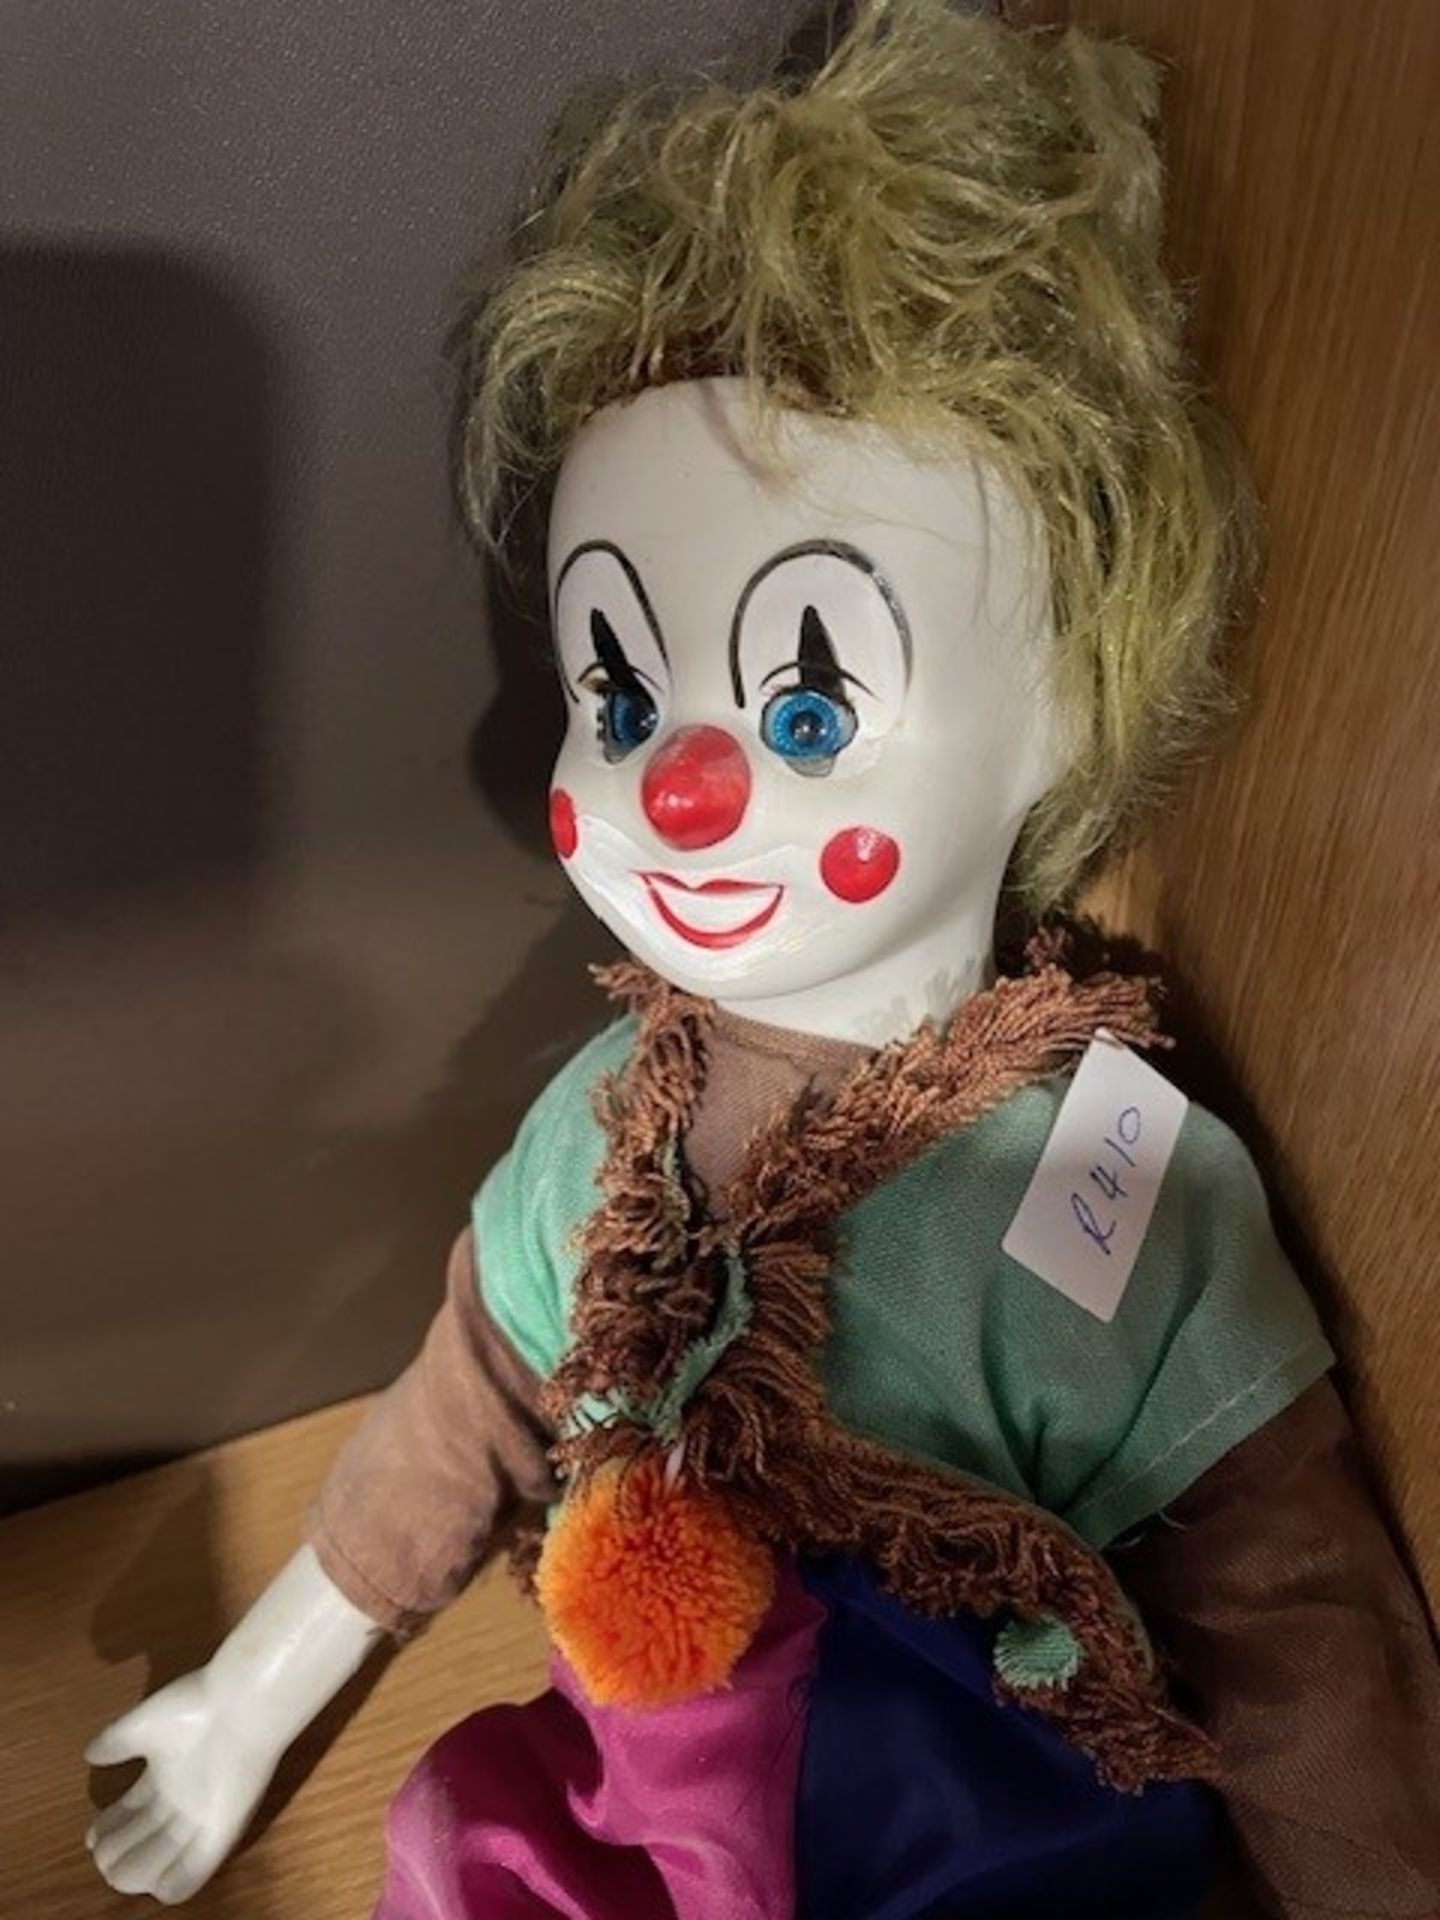 Two Vintage Dolls Including a Clown Doll - Image 5 of 7